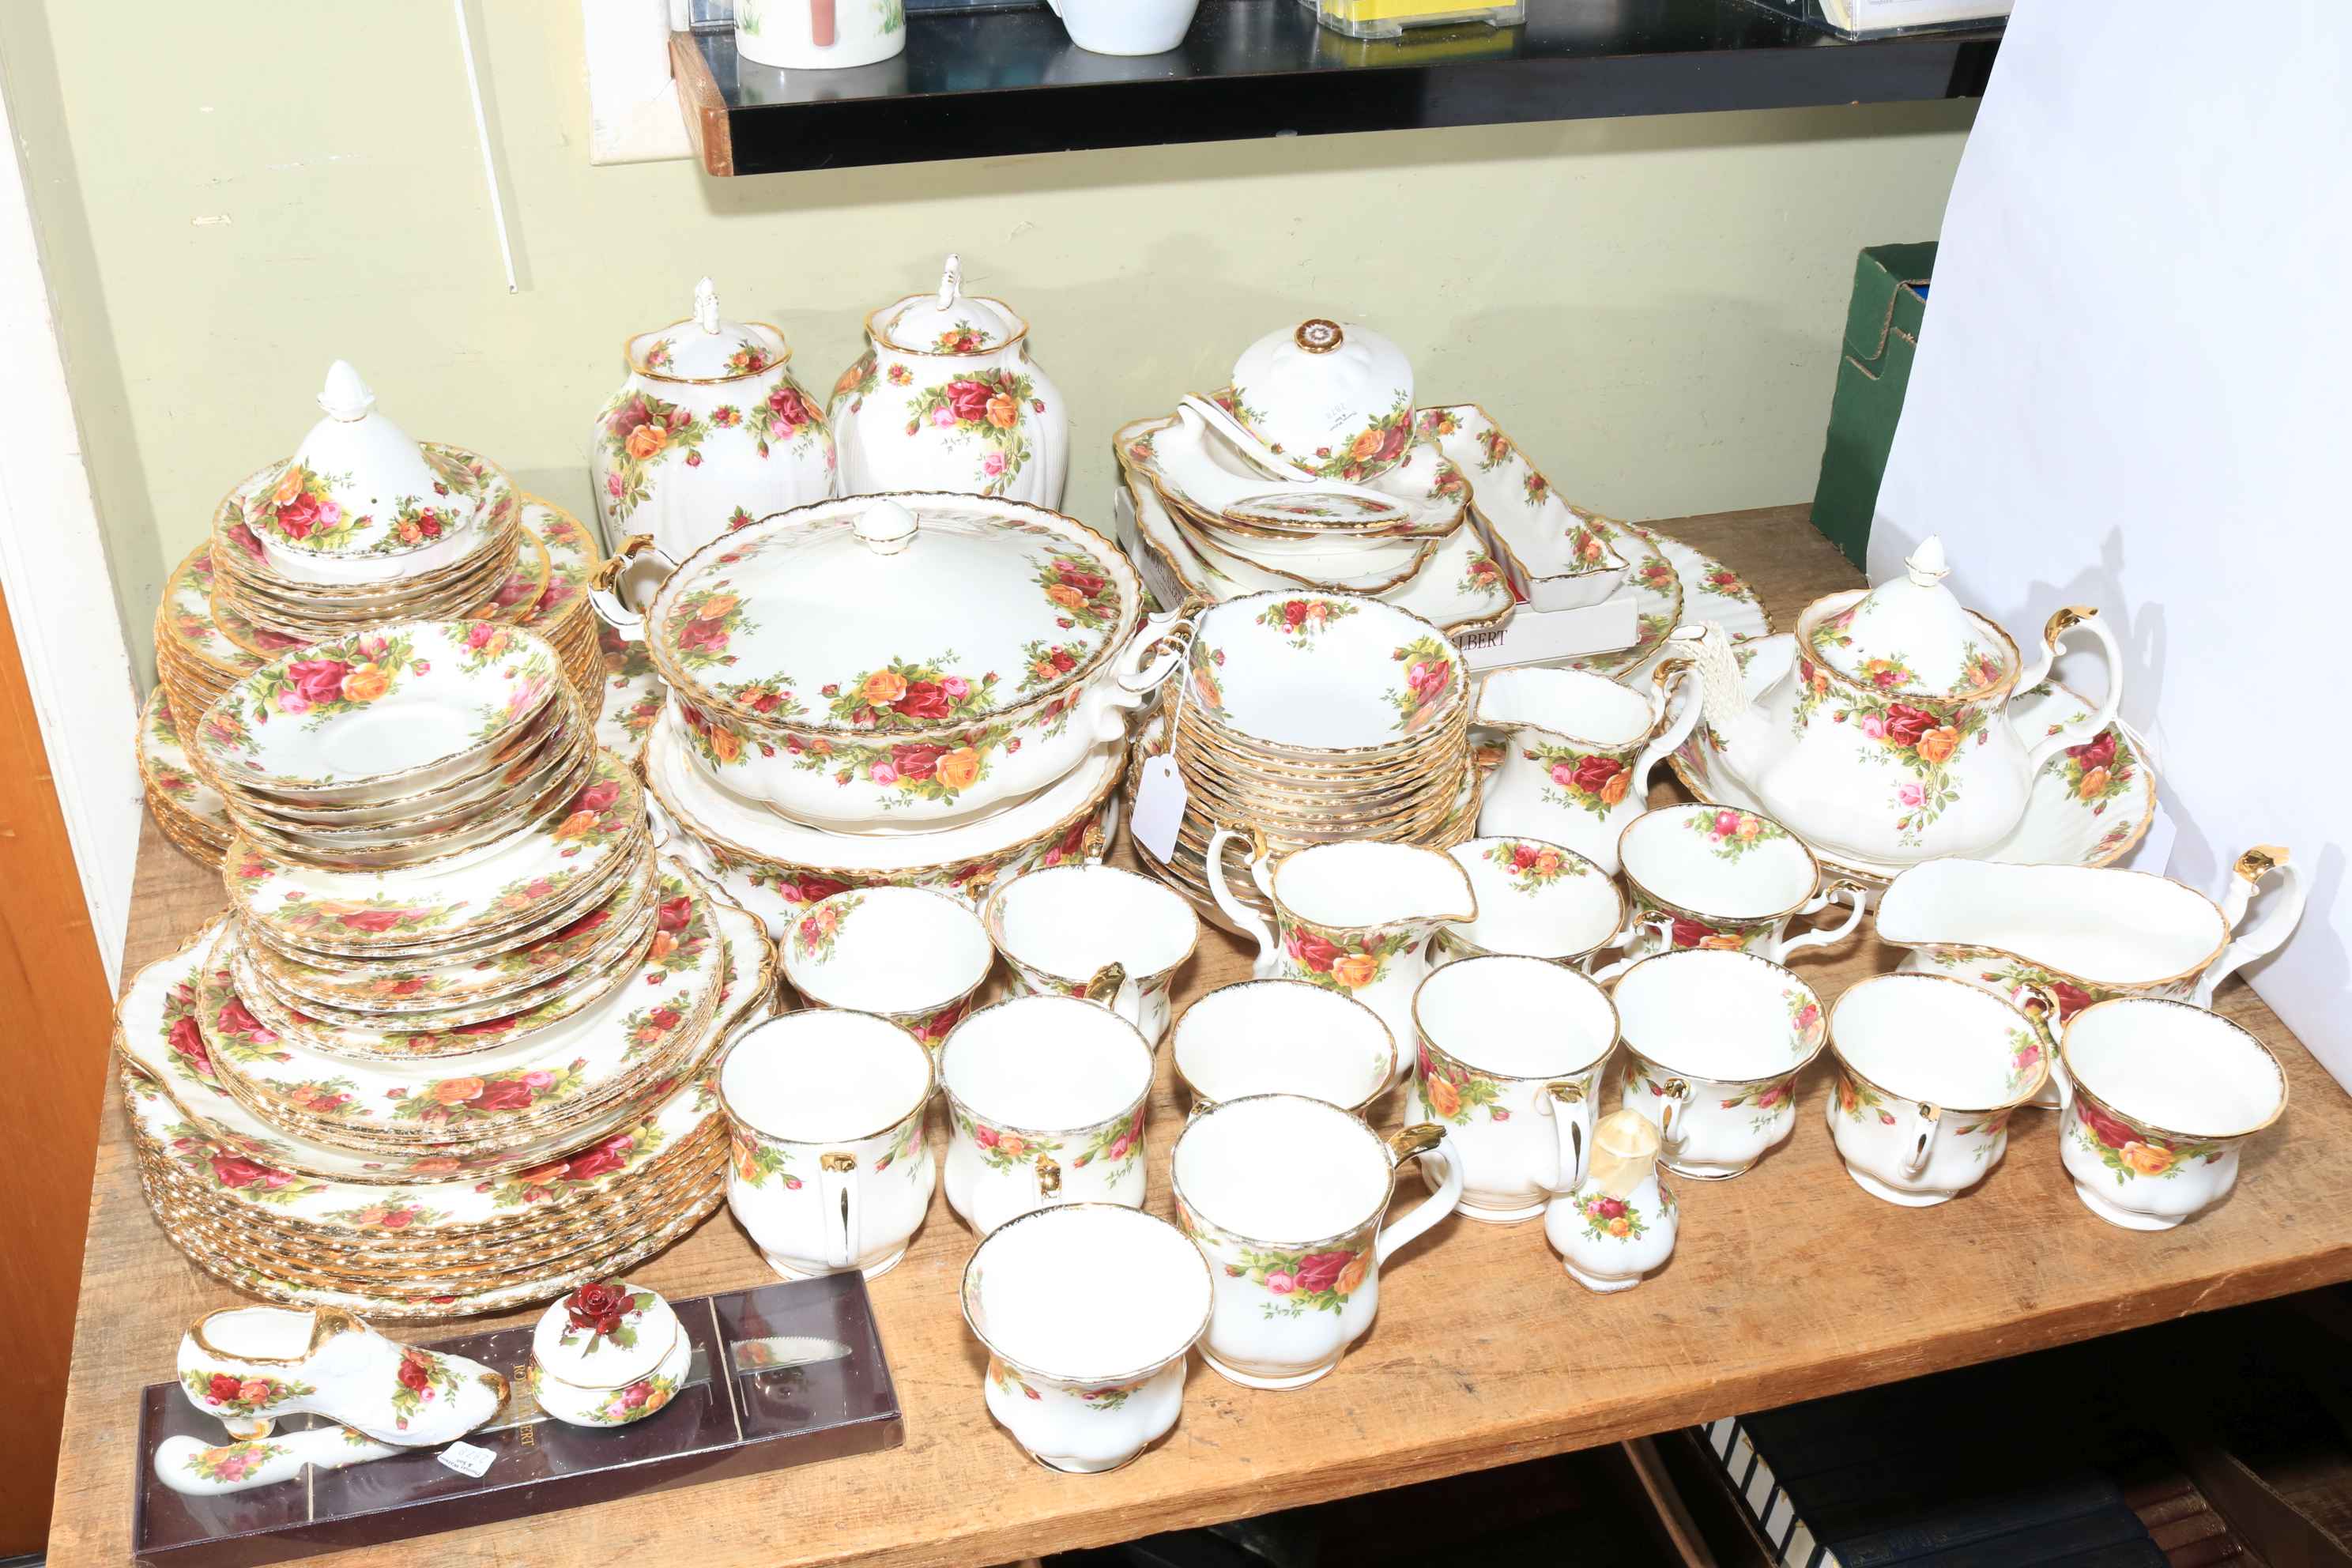 Good collection of Royal Albert Old Country Roses including teapot, tureens, etc,